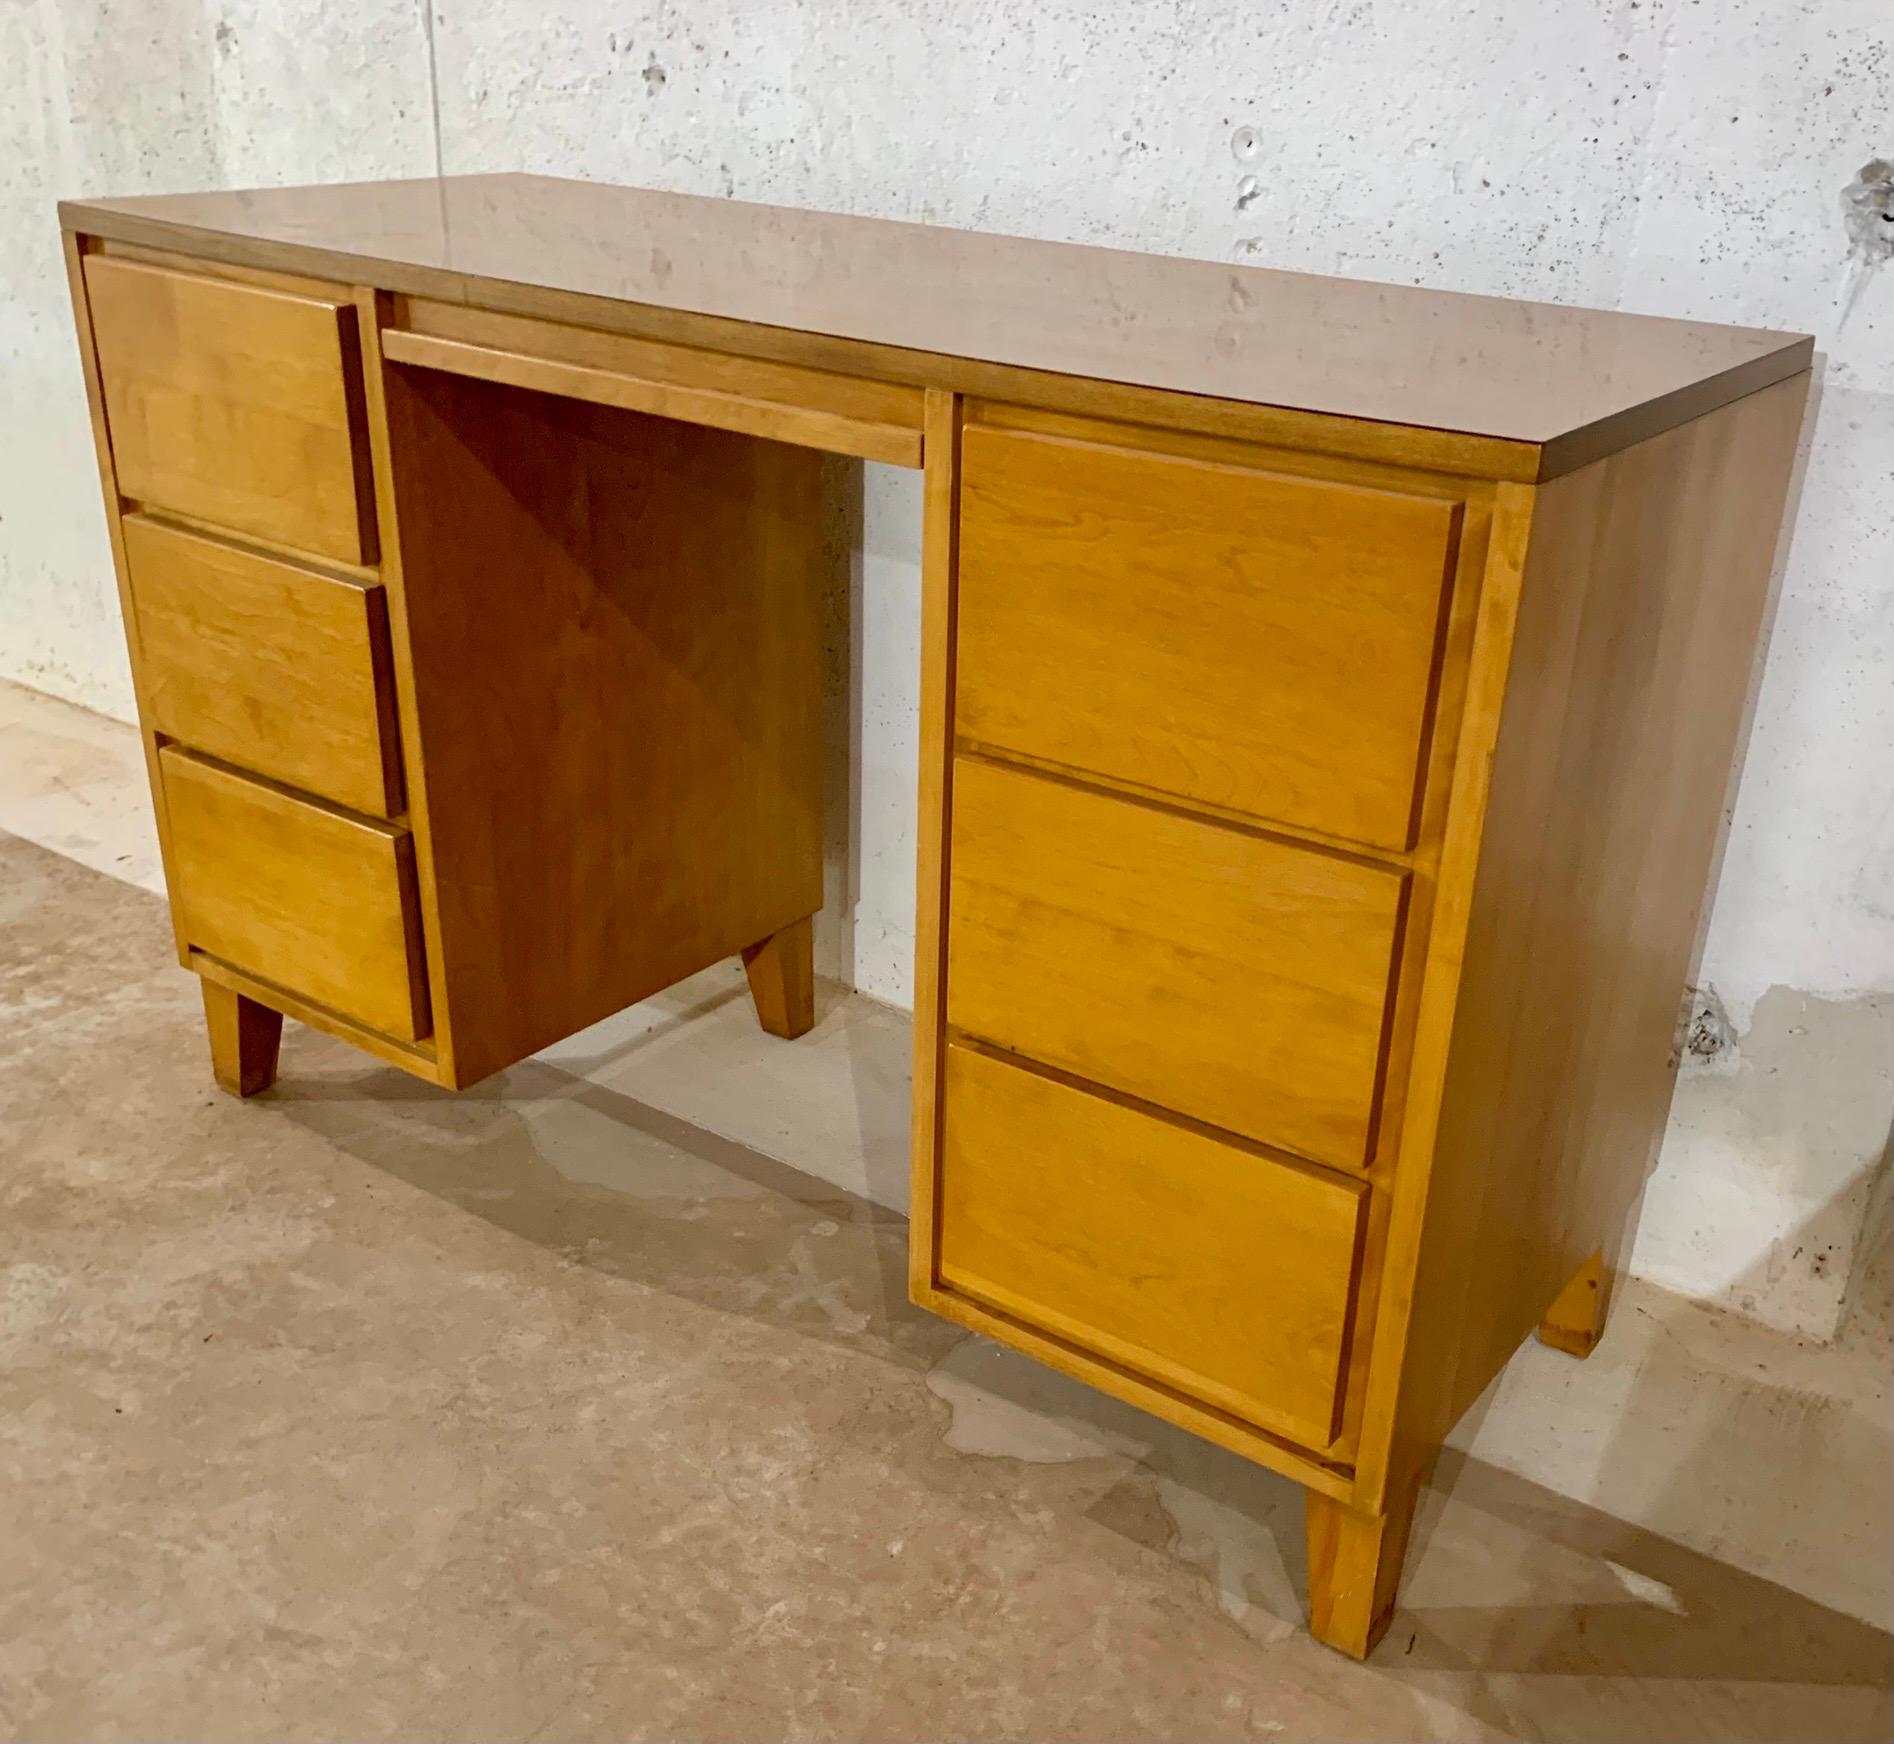 Mid century kneehole desk features a formica top for extra durability. Six drawers with one center drawer. It’s smaller size is perfect for a smaller office or apartment.